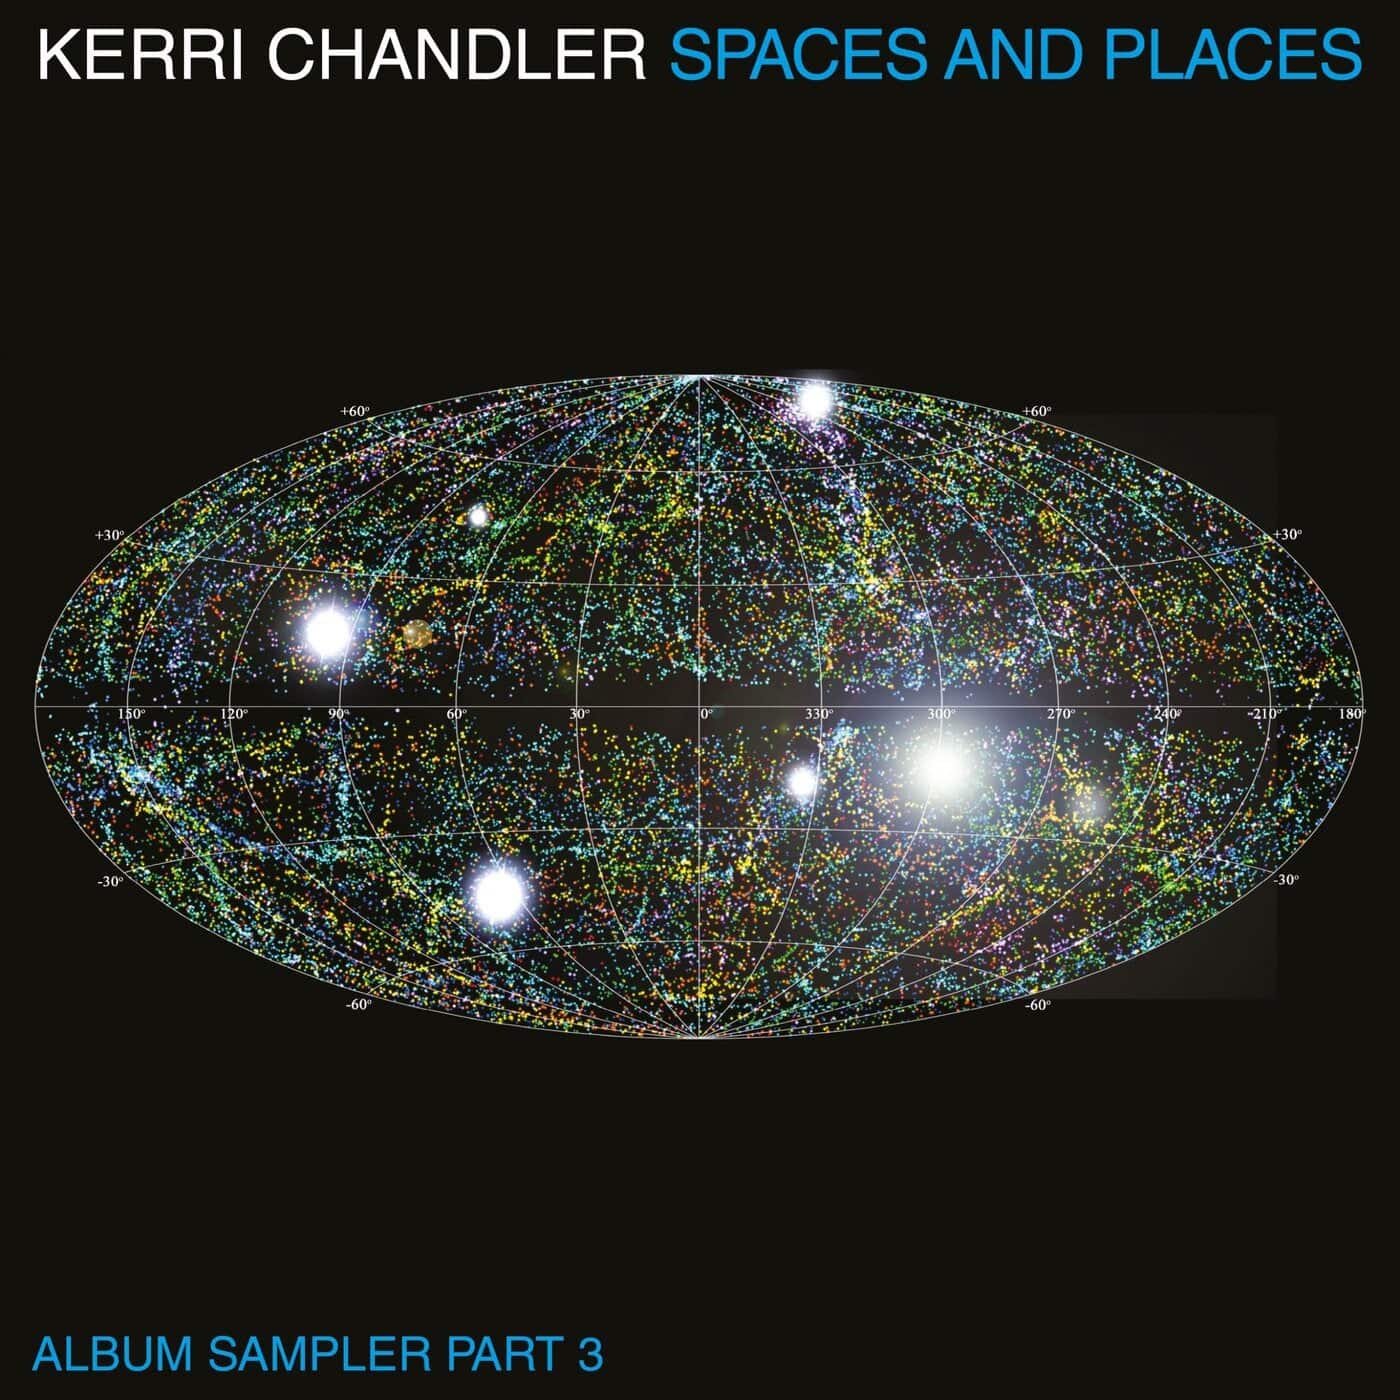 Download Spaces and Places Album Sampler 3 on Electrobuzz